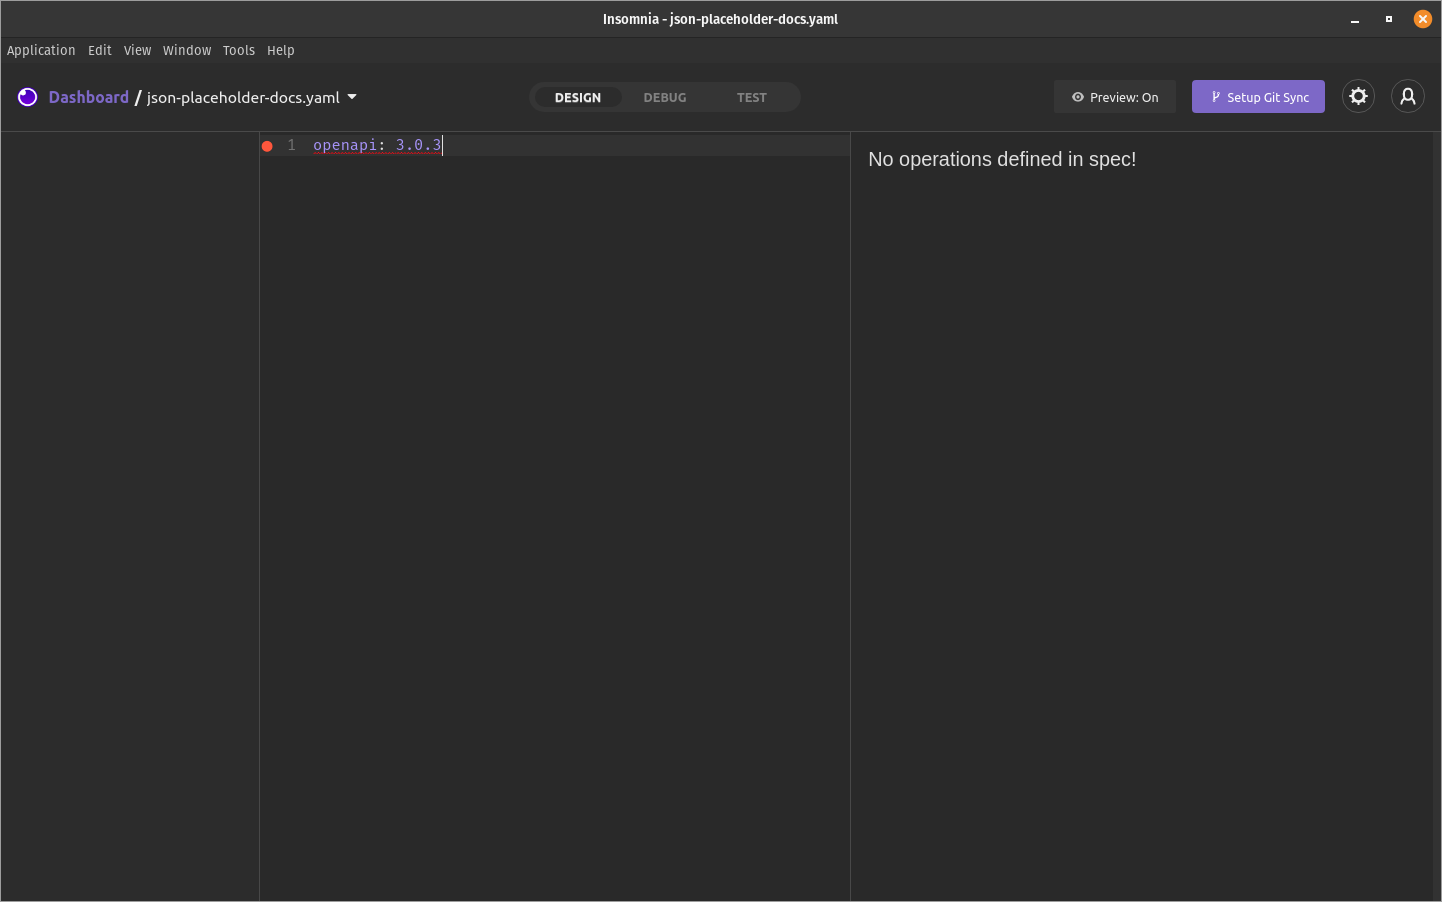 Screenshot of Insomnia showing one line added to the center pane, which is the code editor.